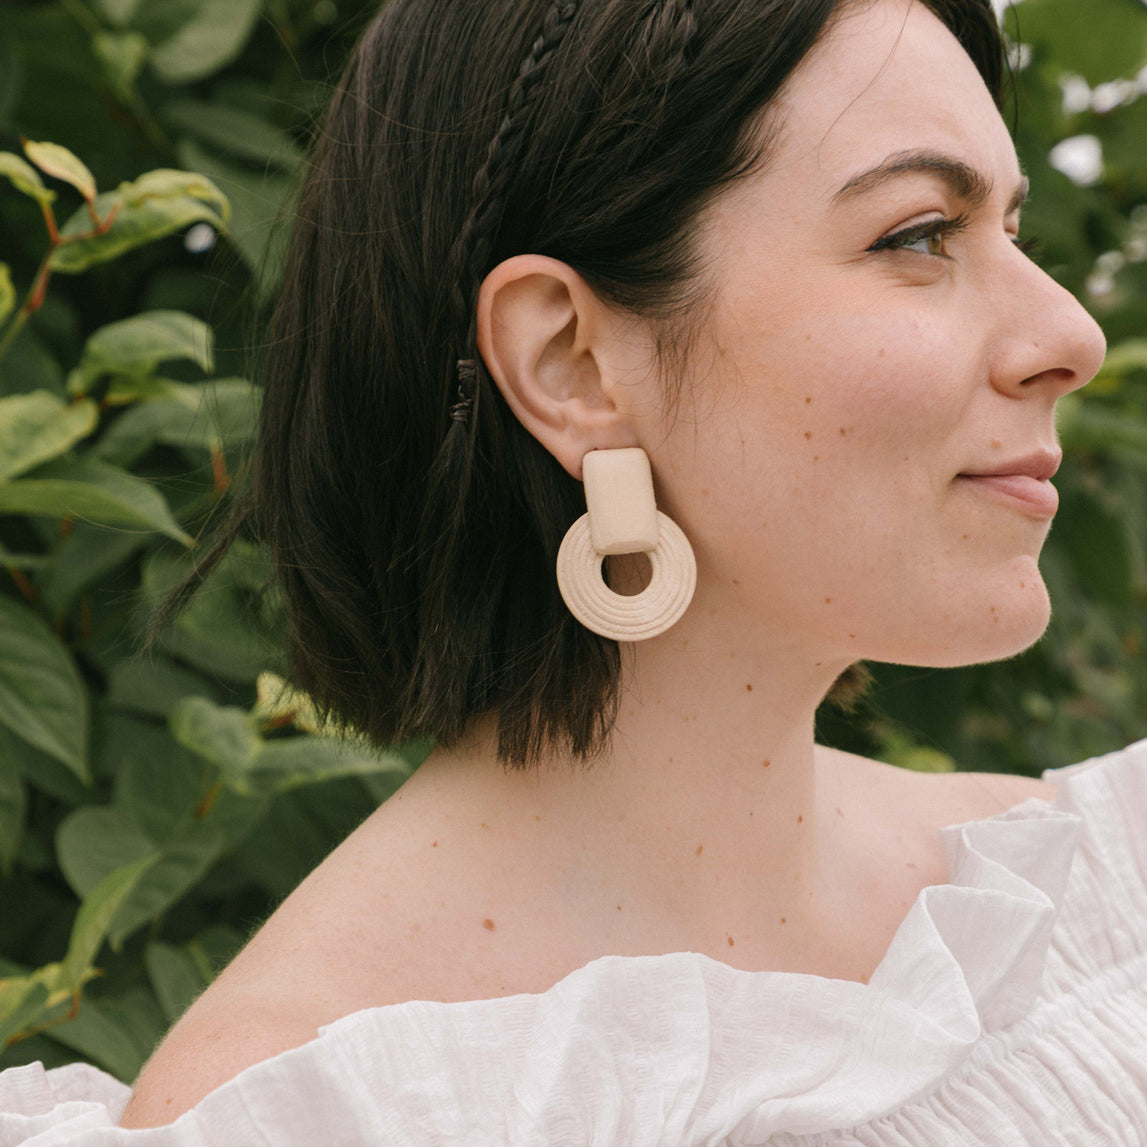 A model wearing the Sand Dune Clip On Earrings provide a secure hold for 8-12 hours, with the ability to adjust to any ear size. Crafted with copper alloy and wood, one pair is included. The screwback clip-on design is ideal for thick/large, sensitive, small/thin, and stretched/healing ear types.